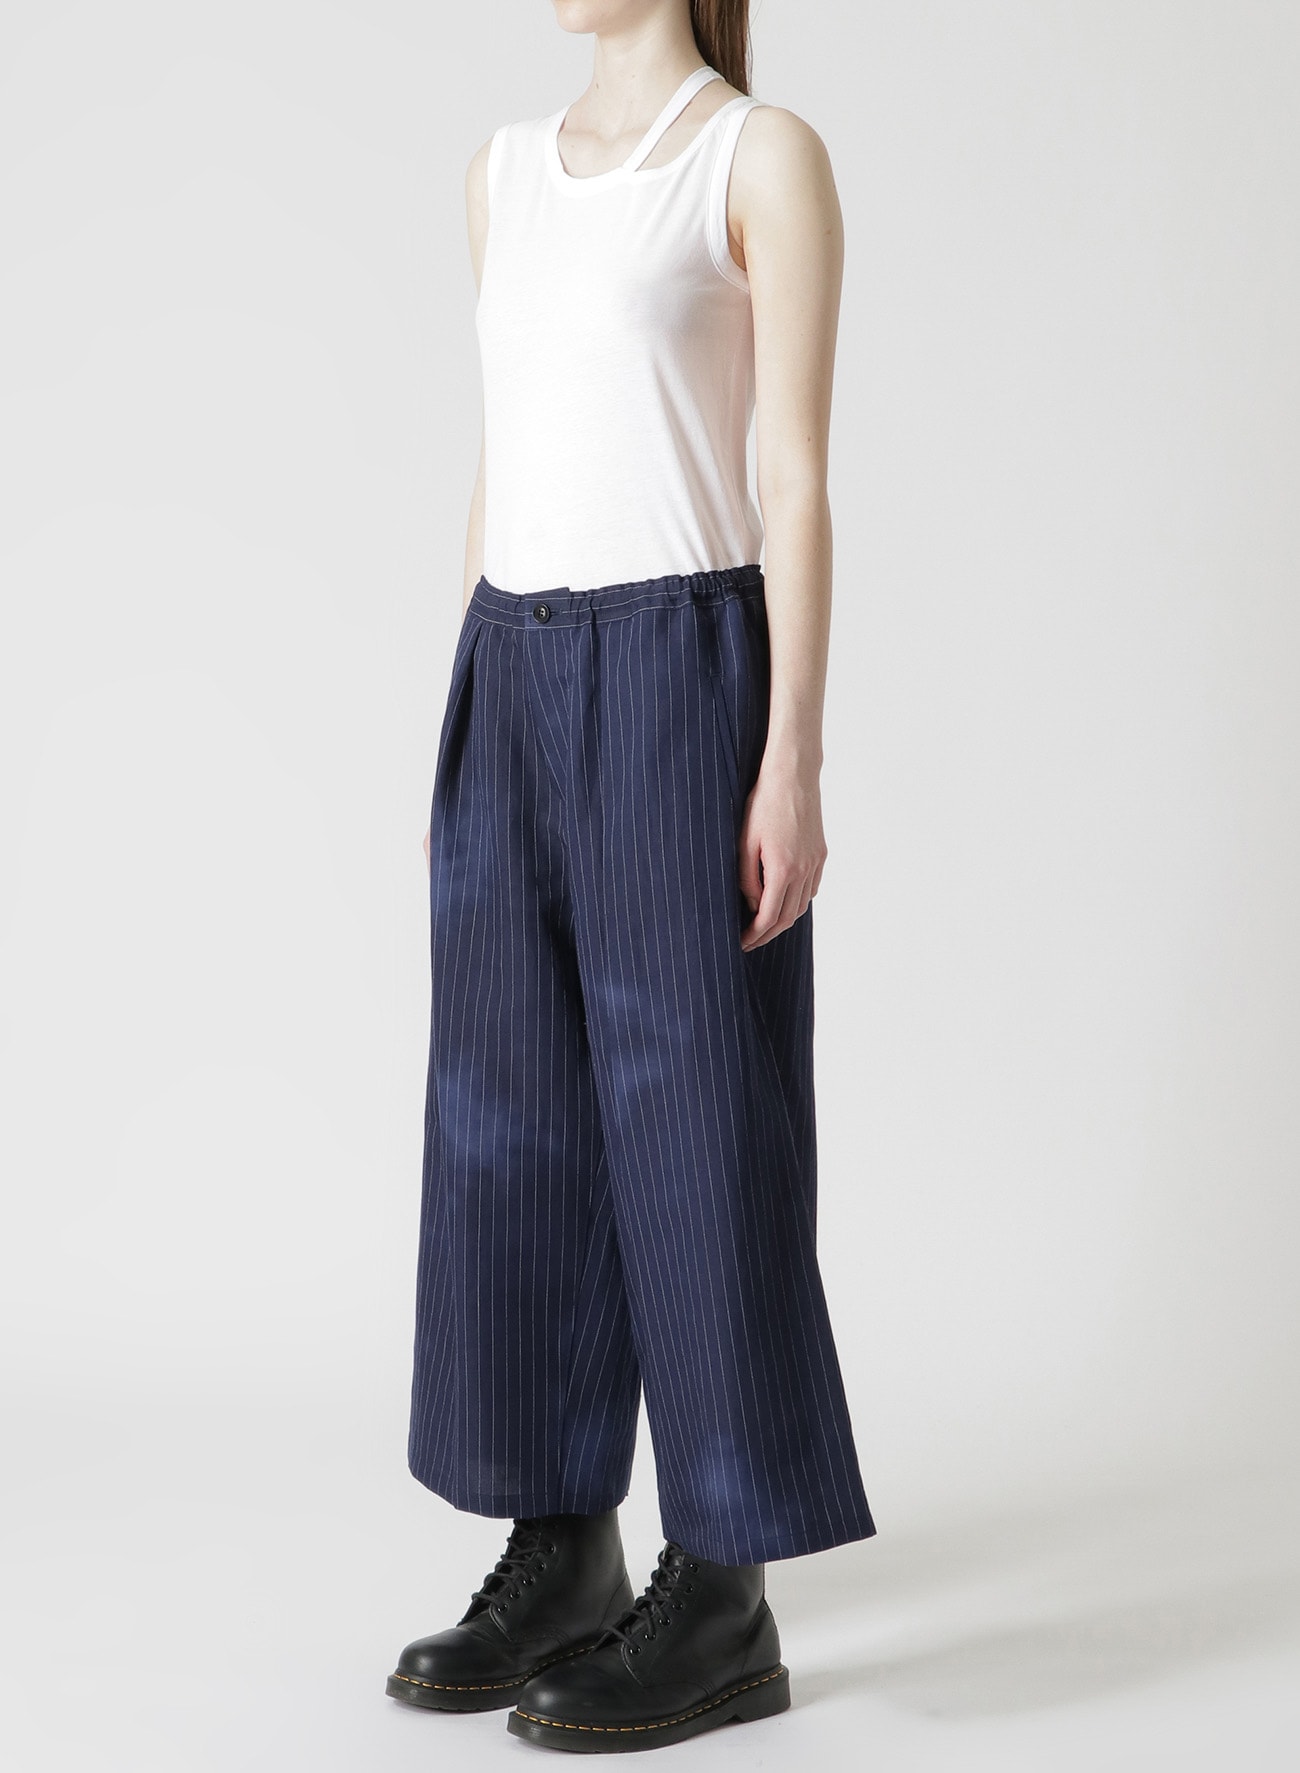 LINEN COTTON PIN-STRIPED UNEVEN DYEING FRONT TUCK WIDE PANTS